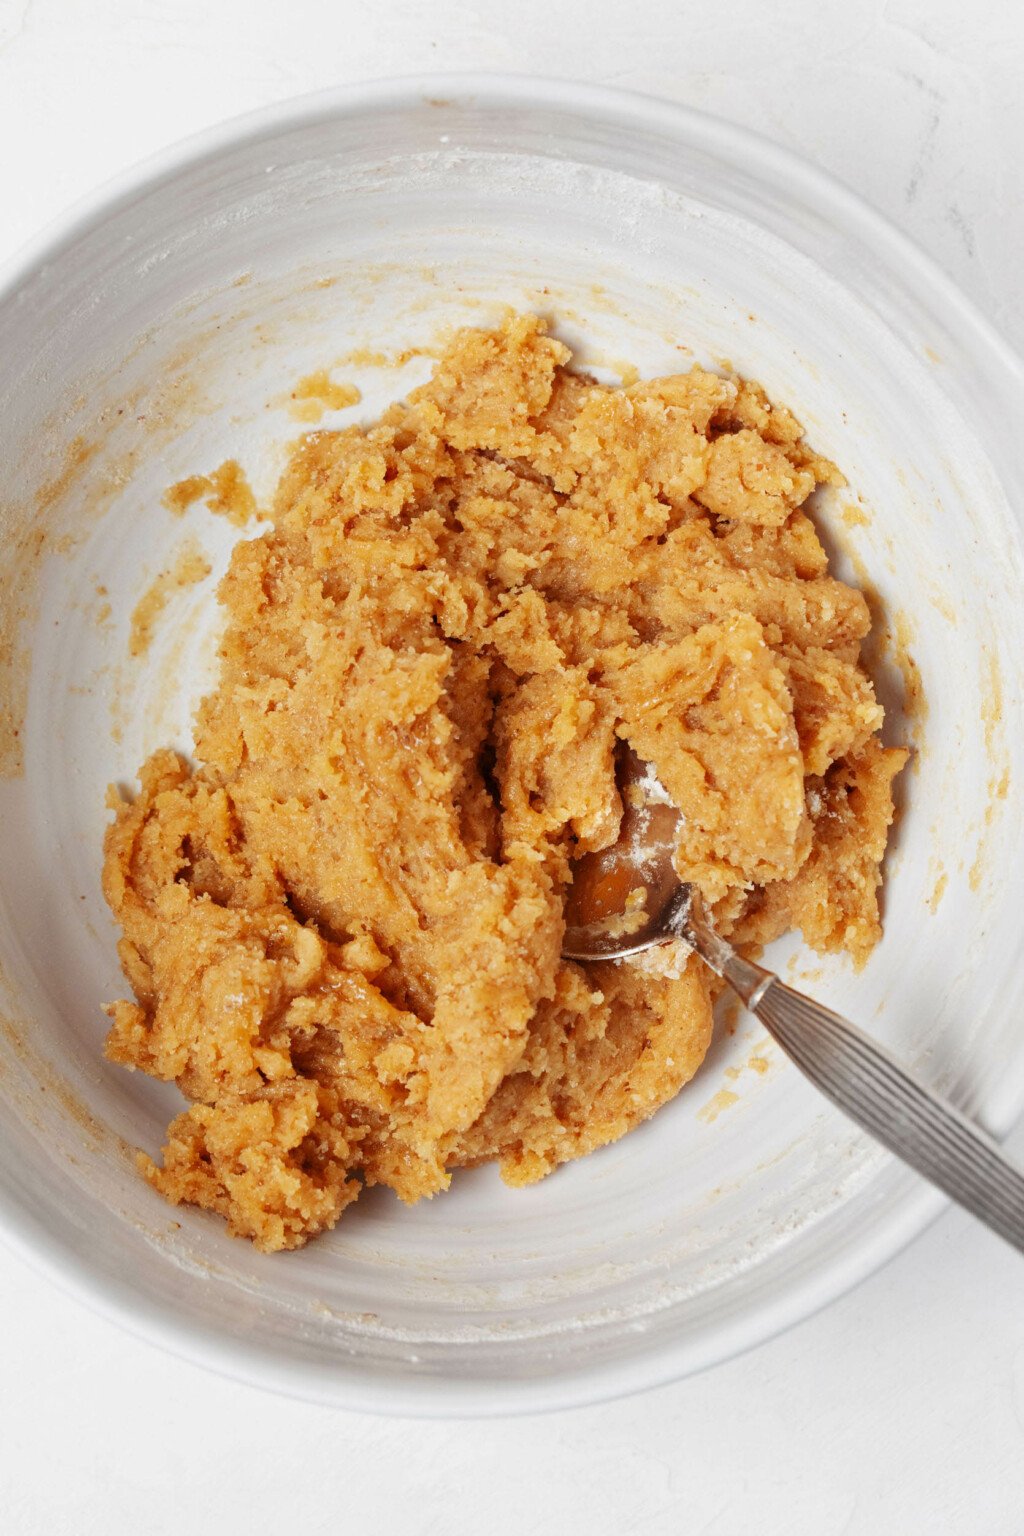 A white, round mixing bowl contains a light brown vegan cookie batter.